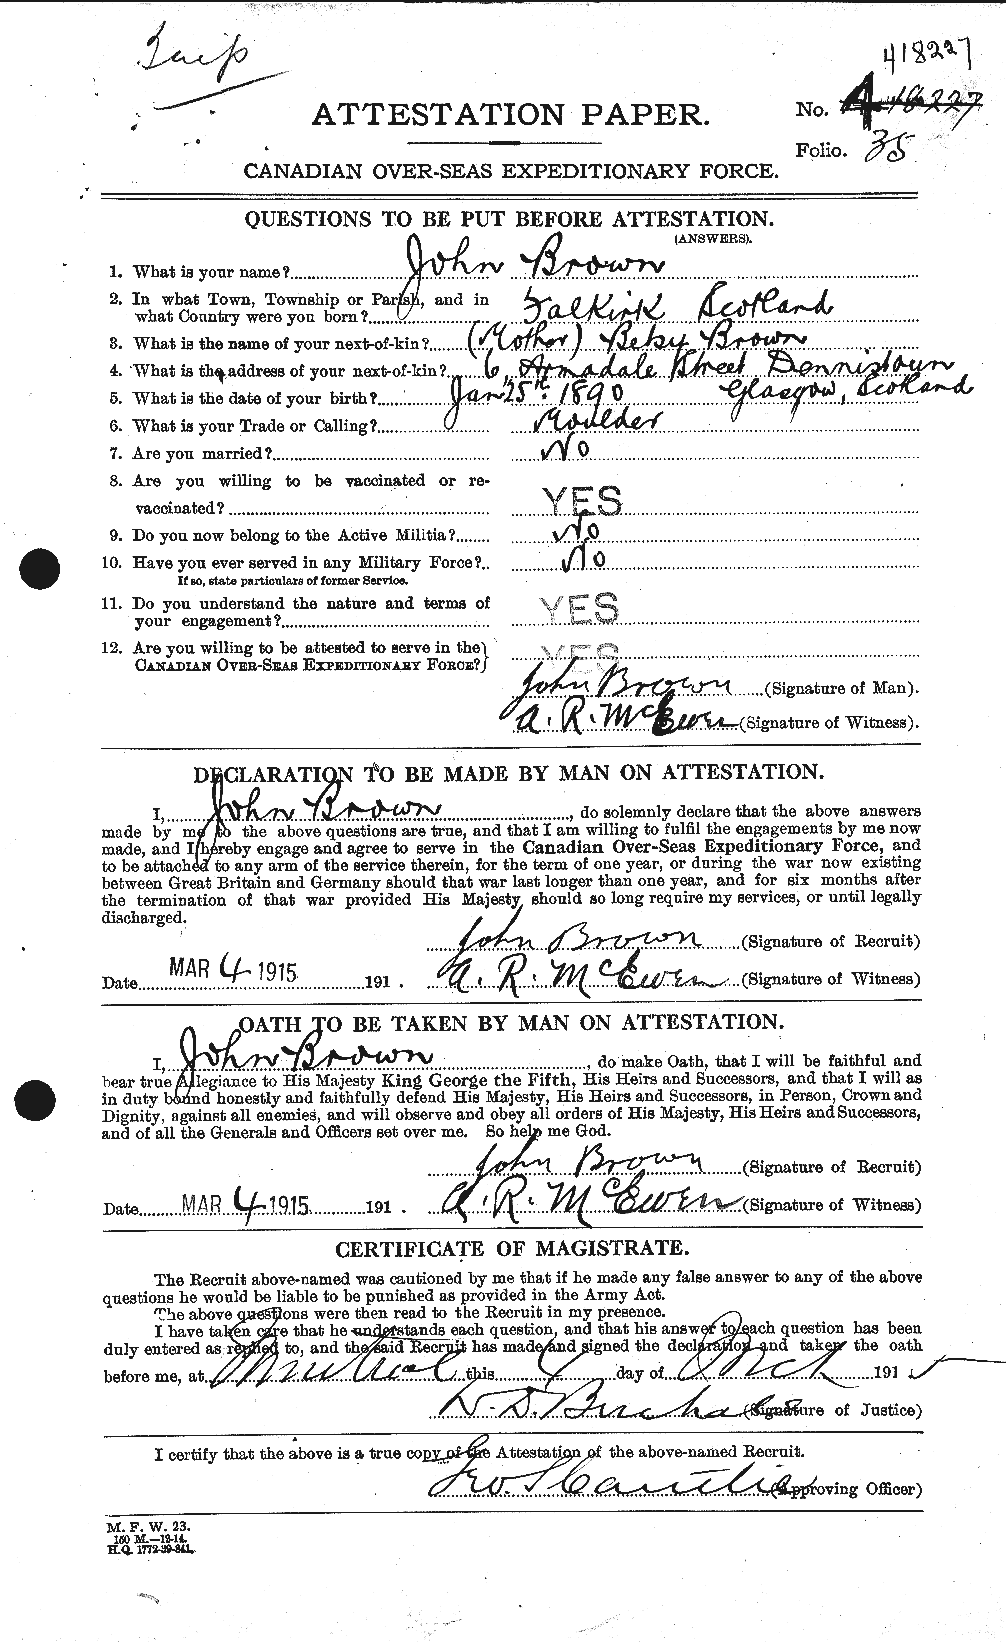 Personnel Records of the First World War - CEF 264524a